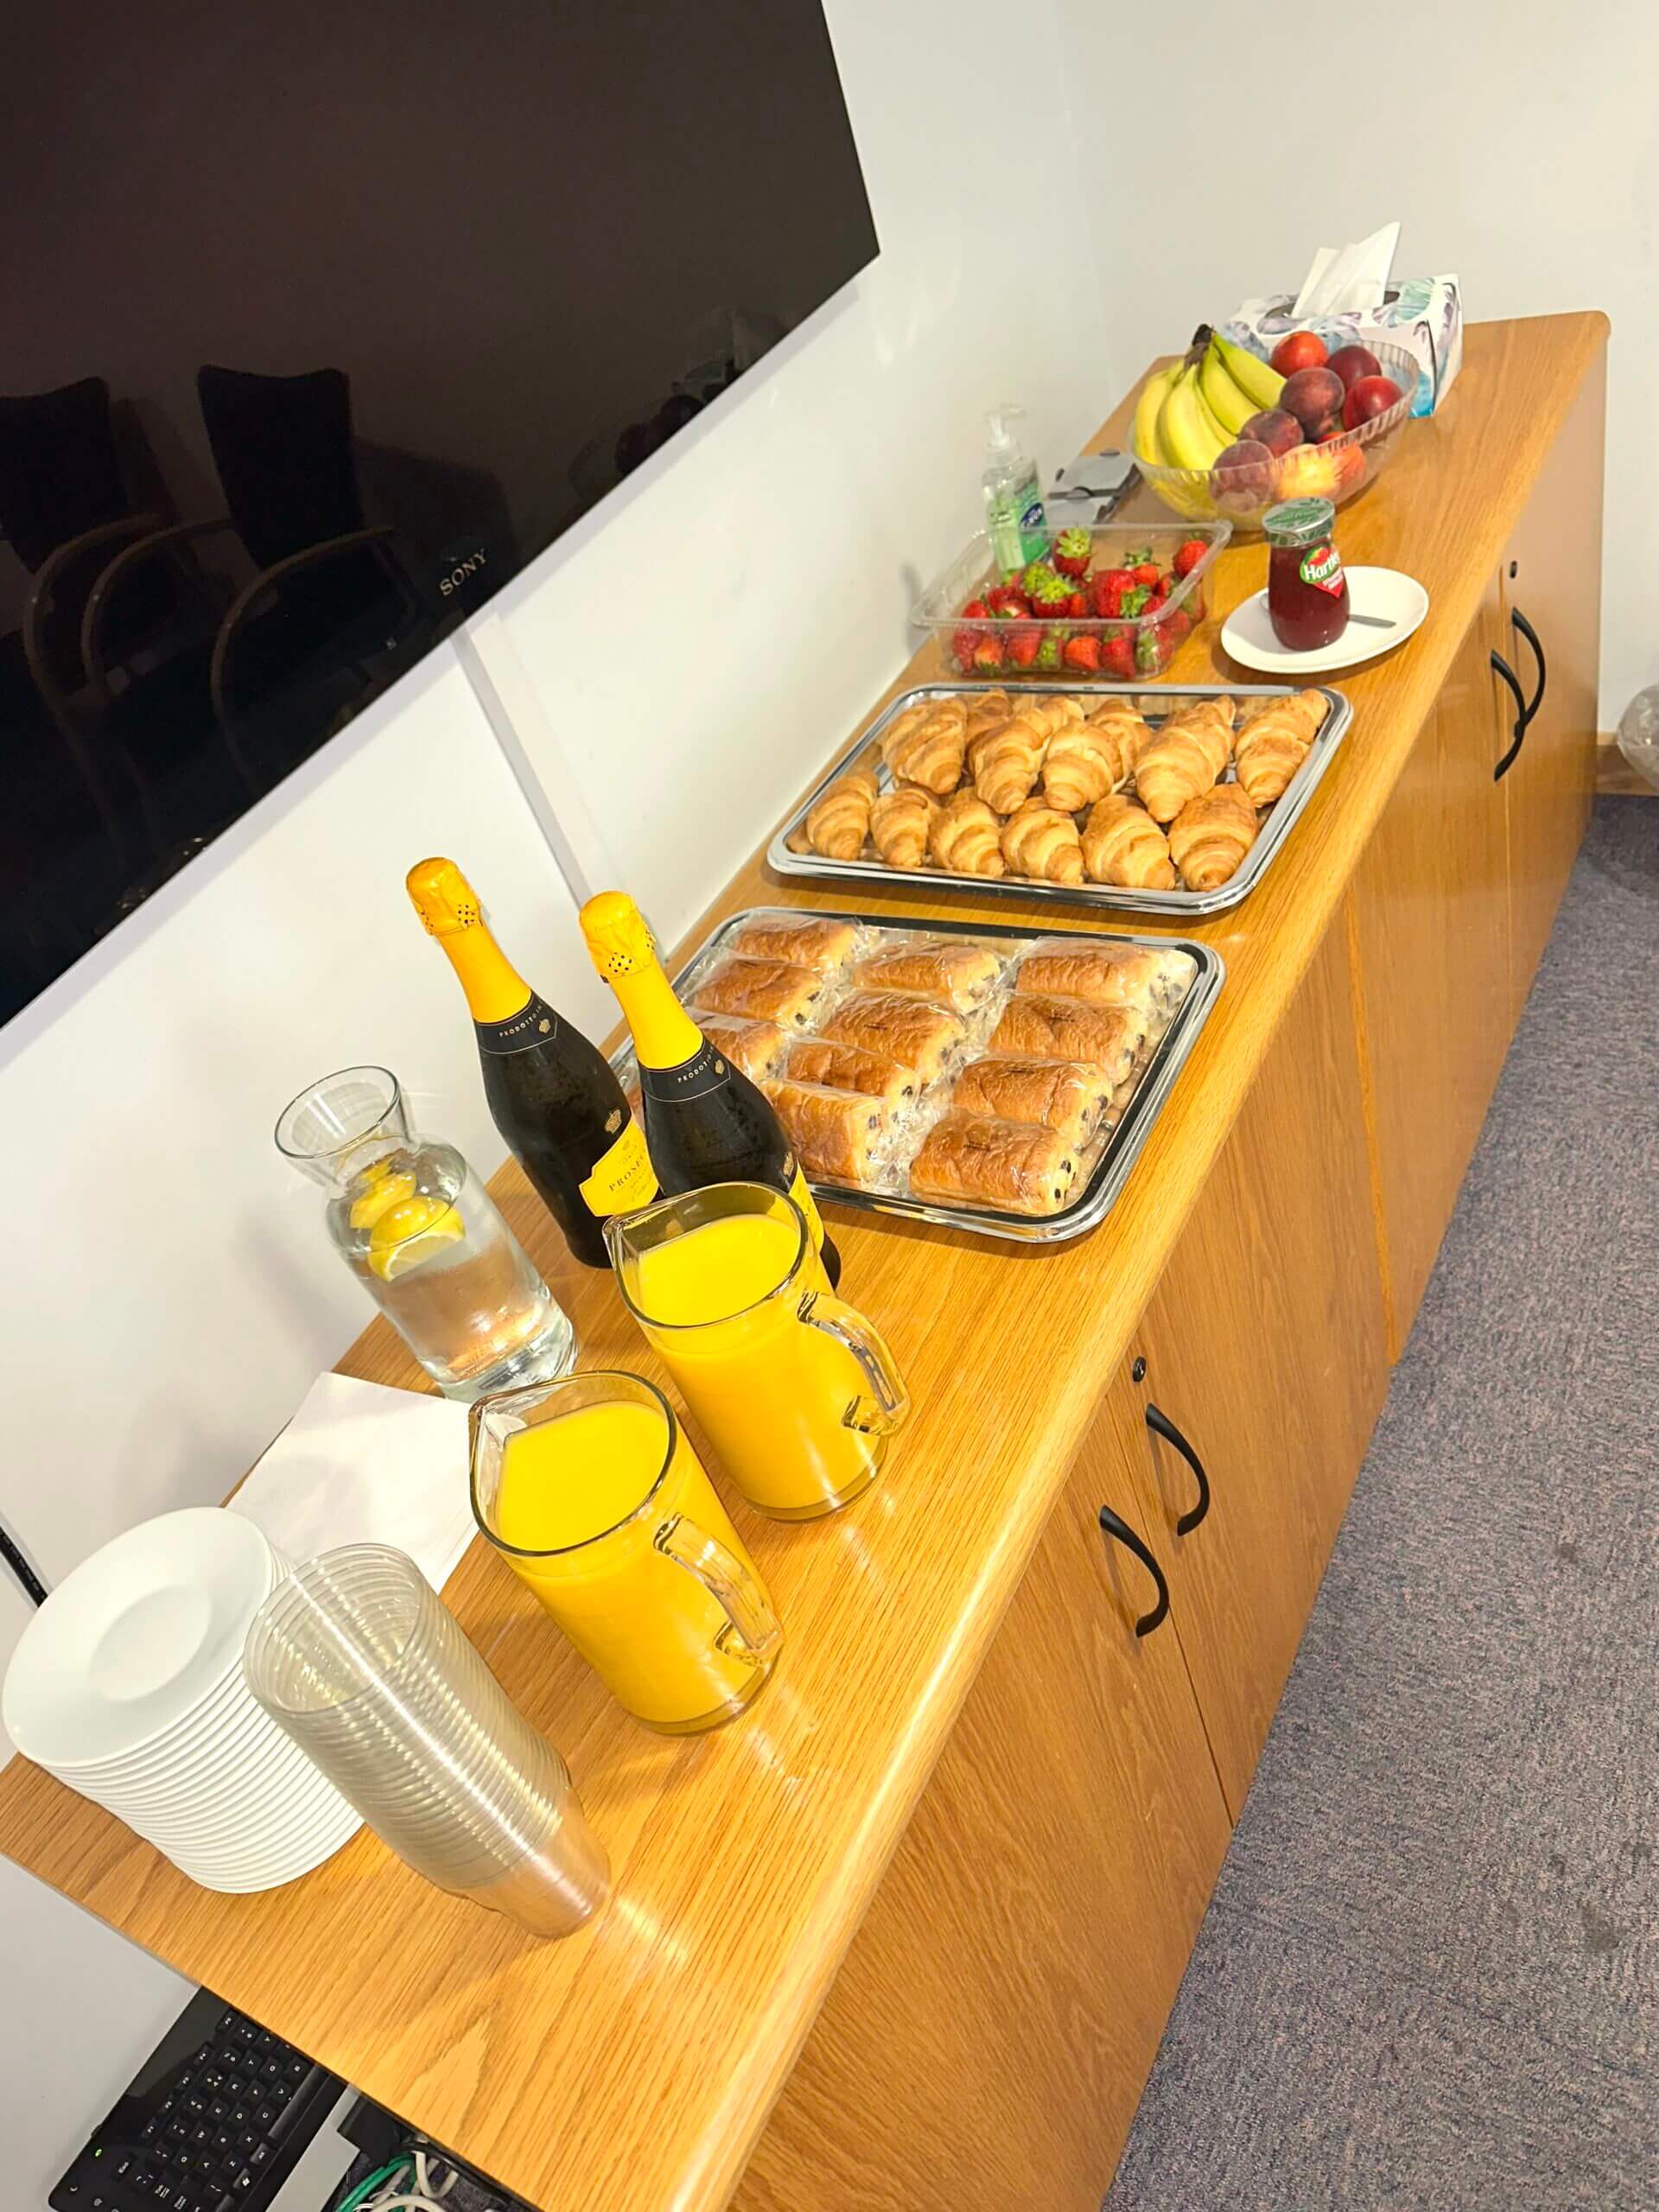 A selection of drinks, pastries and fruit